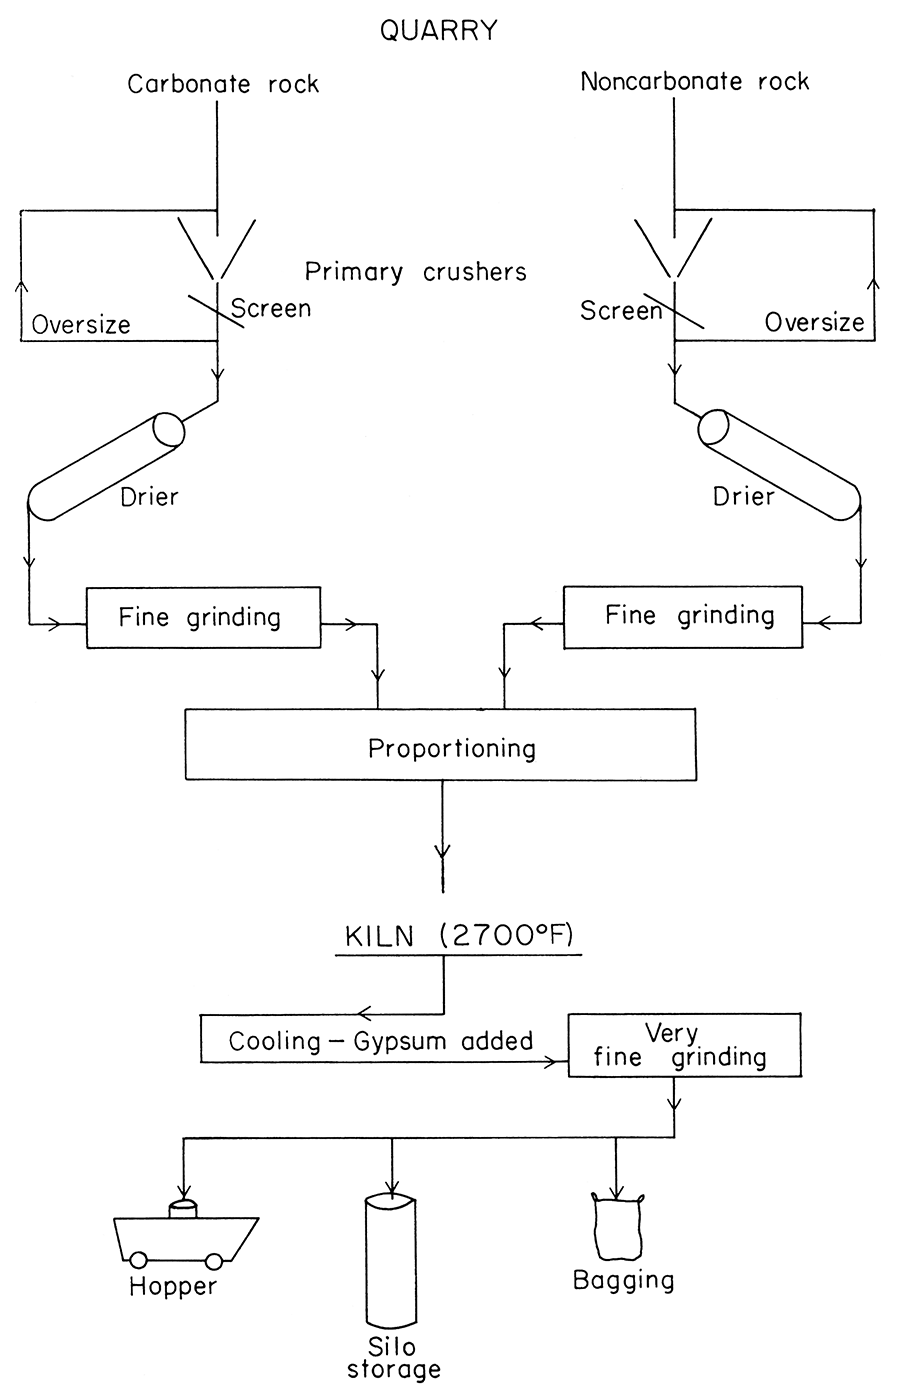 Simplified flow sheet, illustrating the manufacturing process of portland cement.